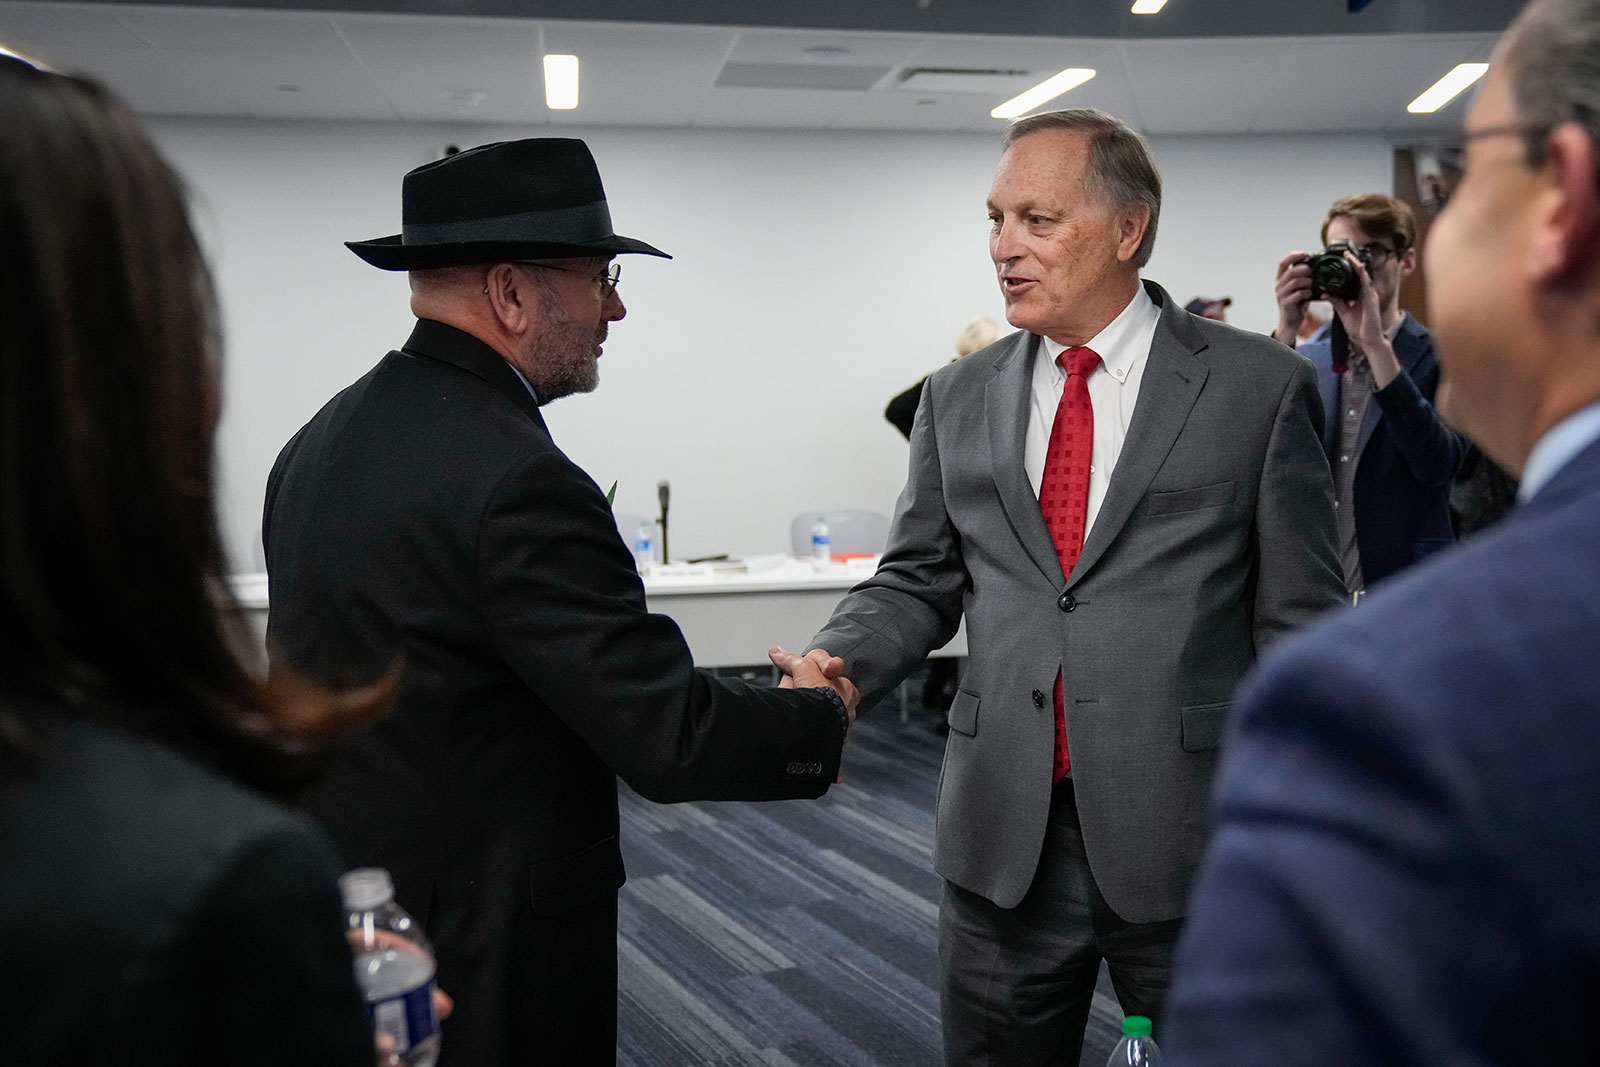 Rep. Clay Higgins shakes hands with Rep. Andy Biggs during a forum on November 14 in Washington, DC. 